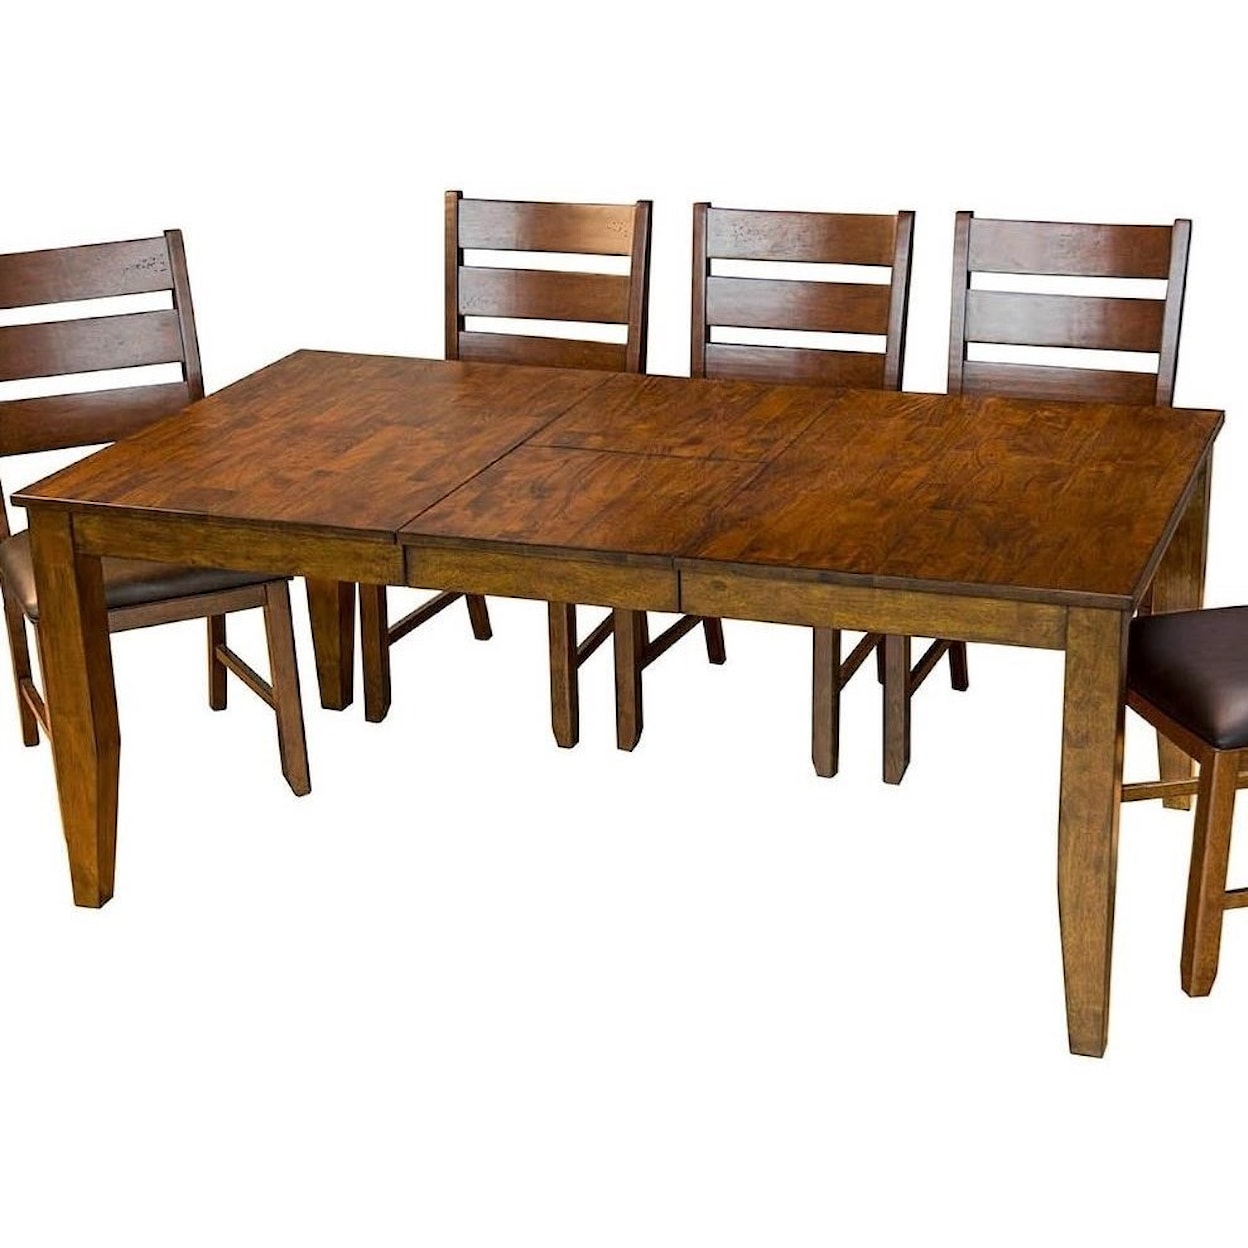 AAmerica Mason Butterfly Leaf Dining Table